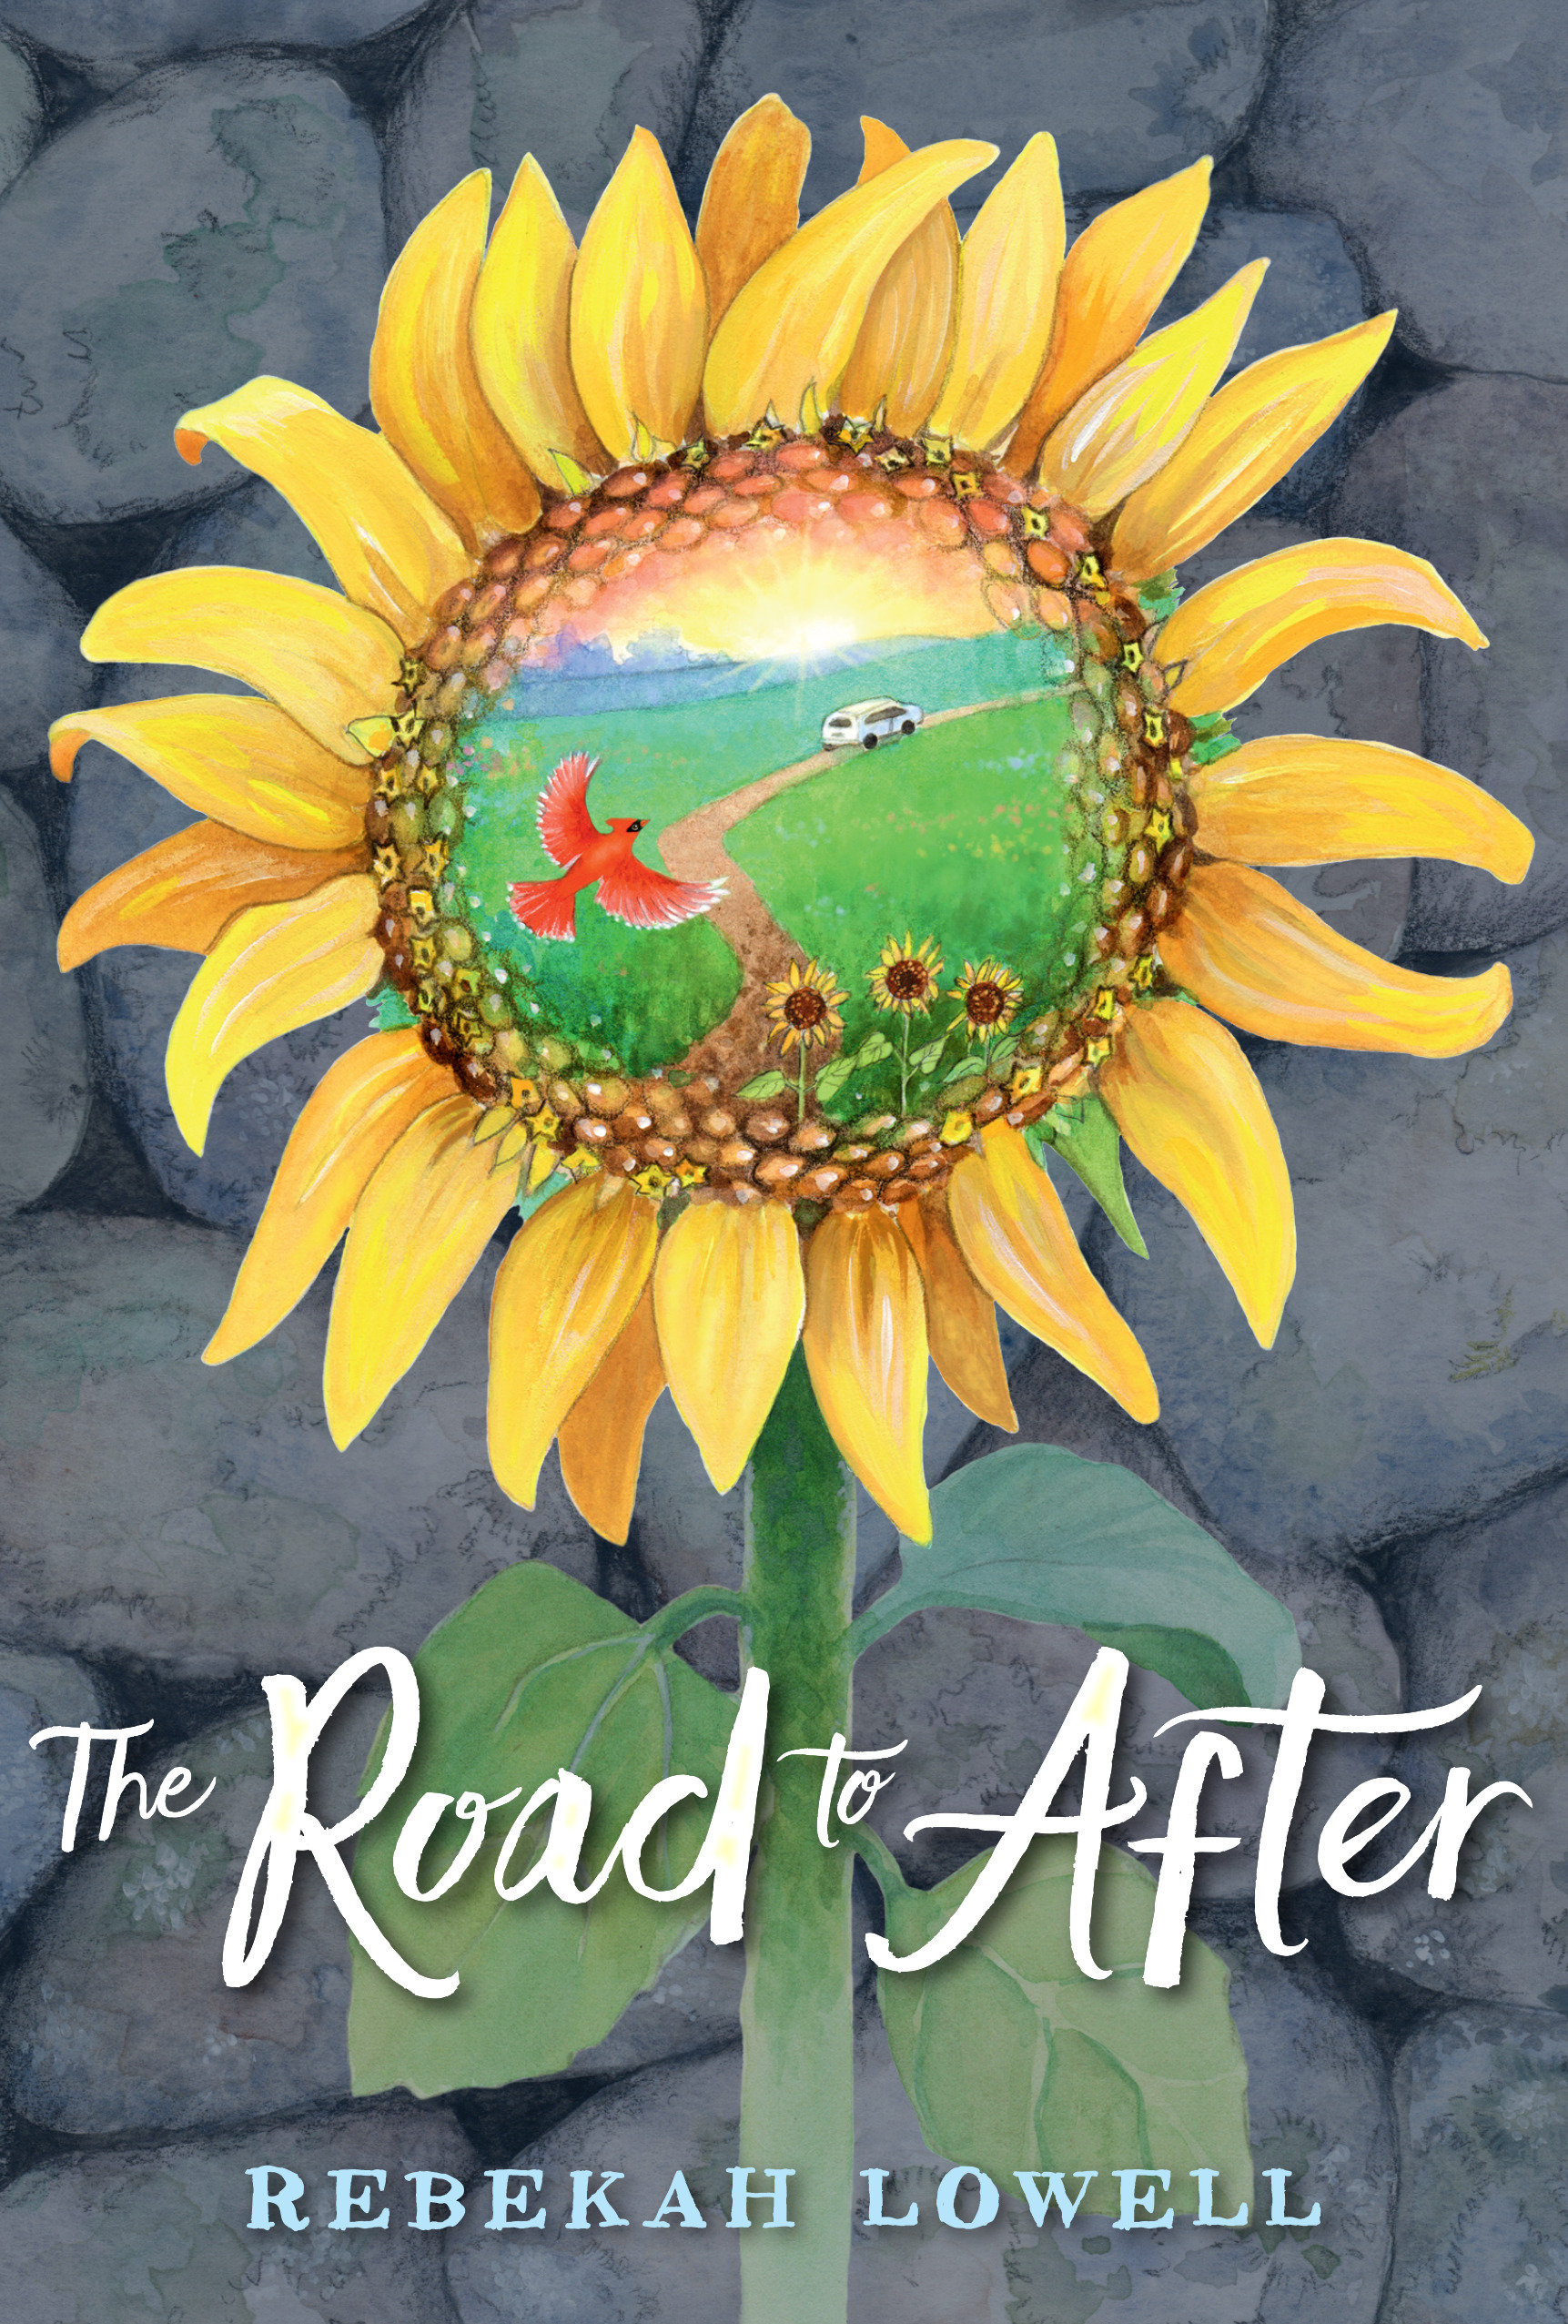 The Road to After | 9-12 years old